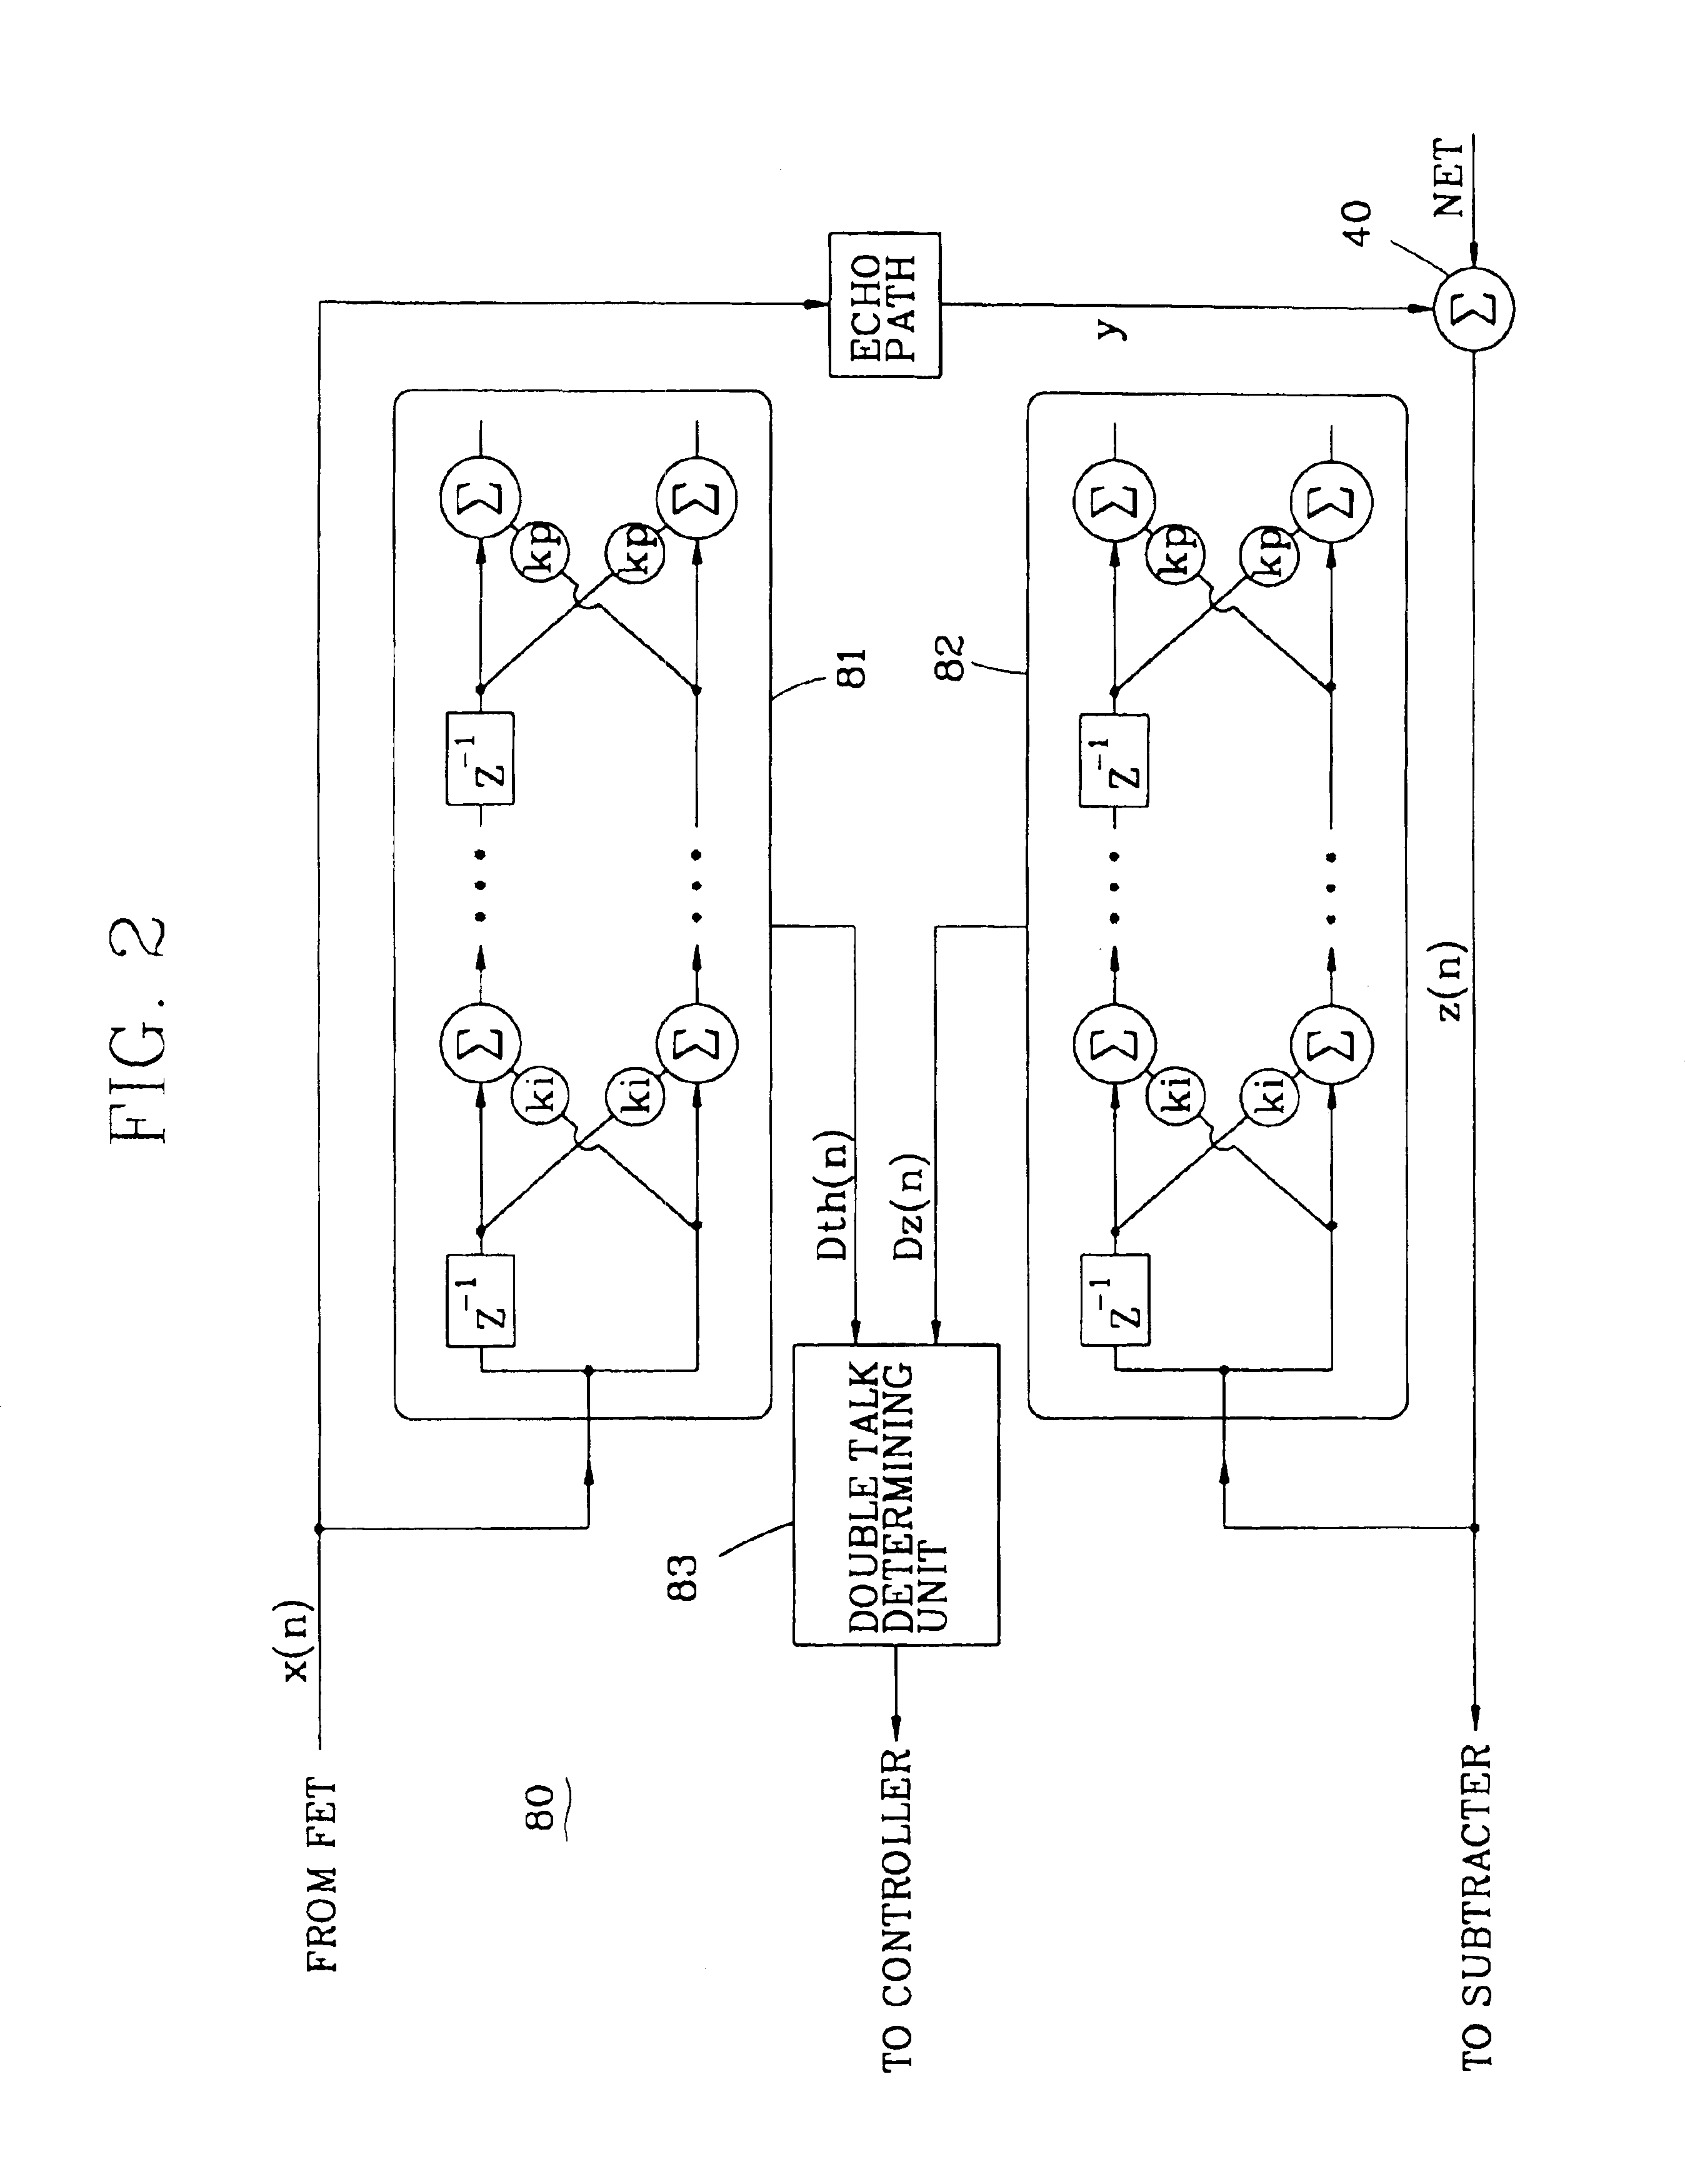 Acoustic echo control system and double talk control method thereof